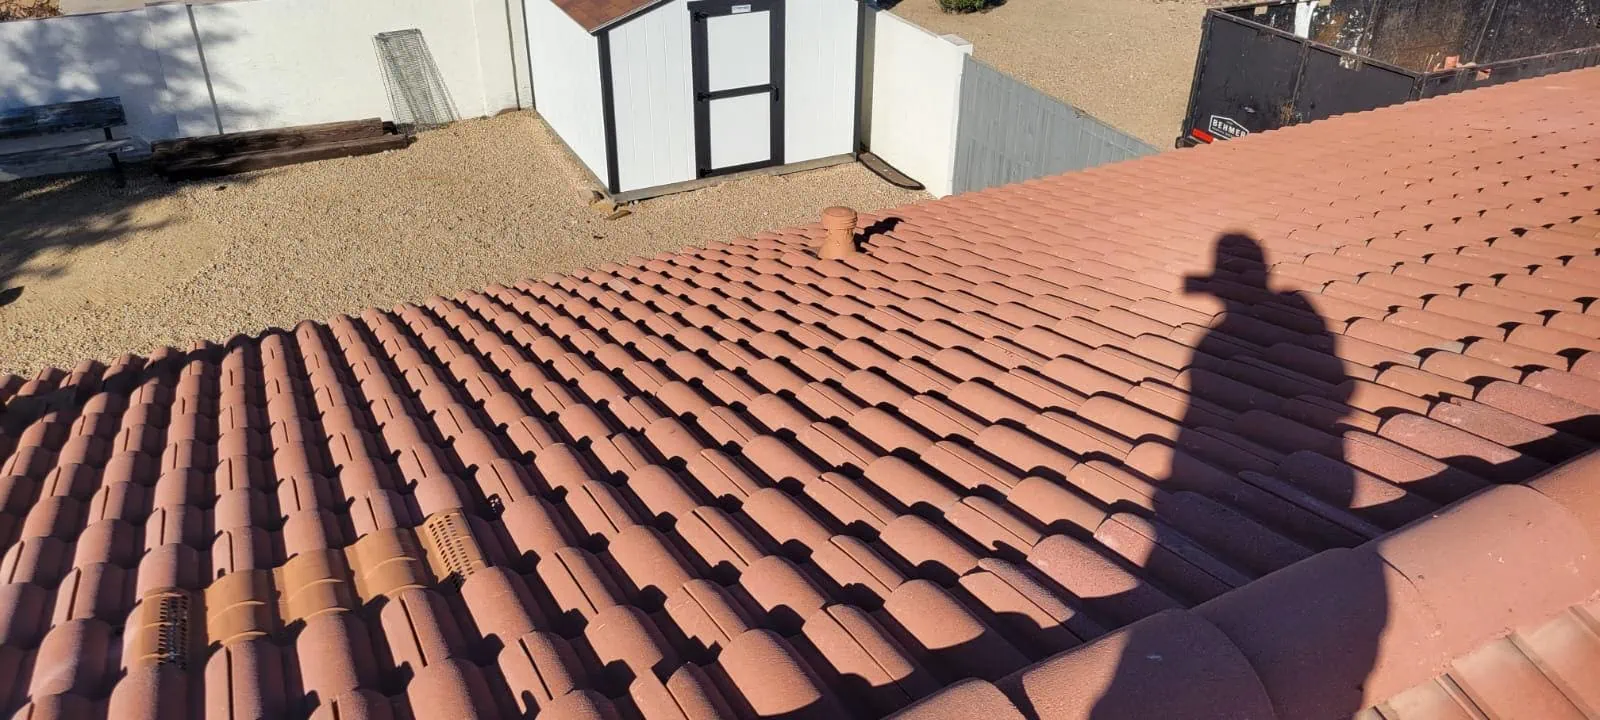 beautiful tile roof in peoria courtesy of behmer professional roofing services